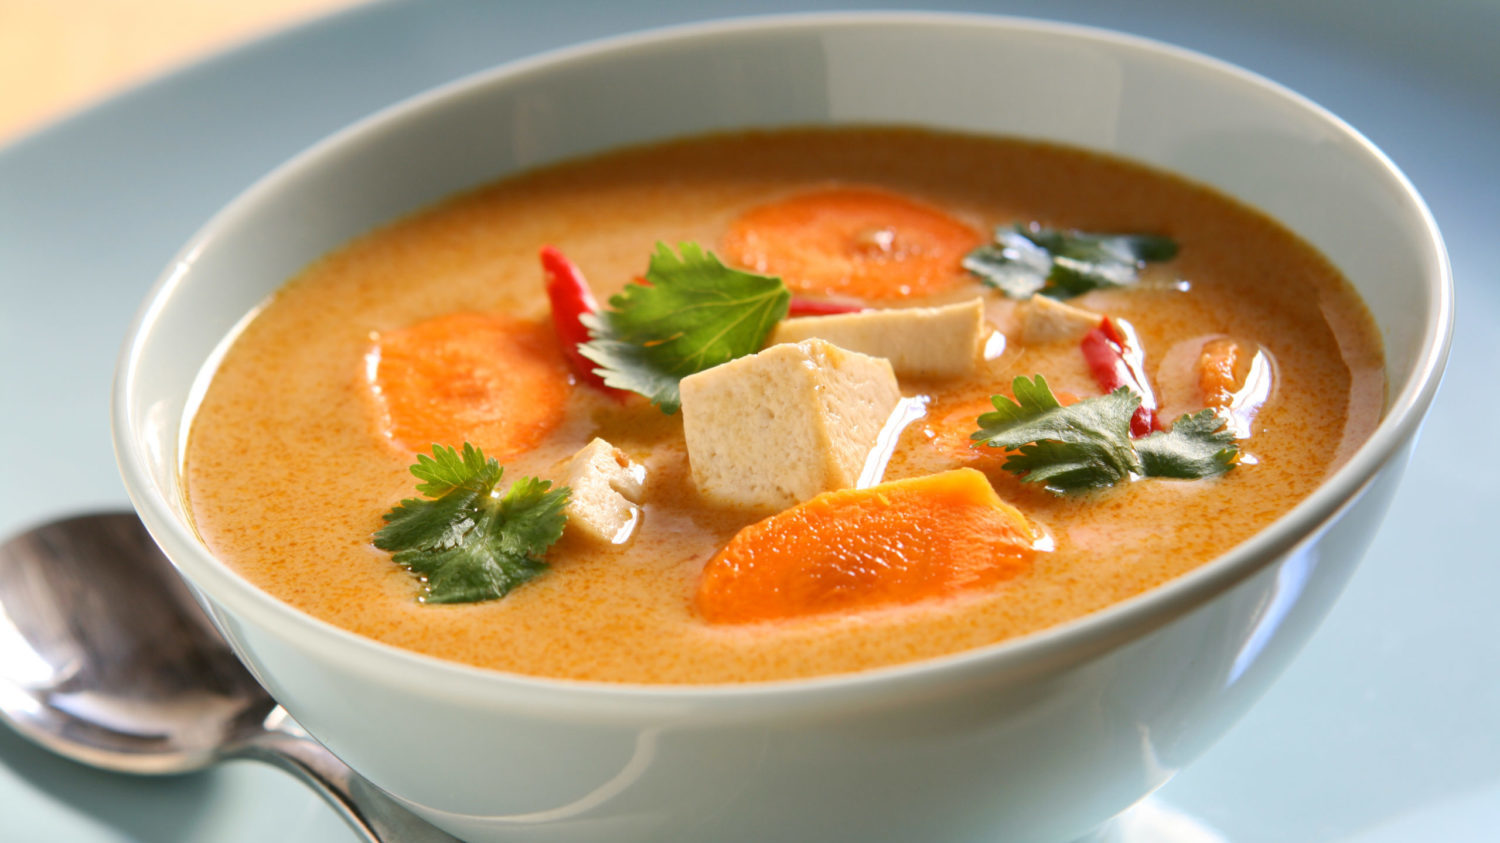 Image for Budget Cooking: Red Curry Soup